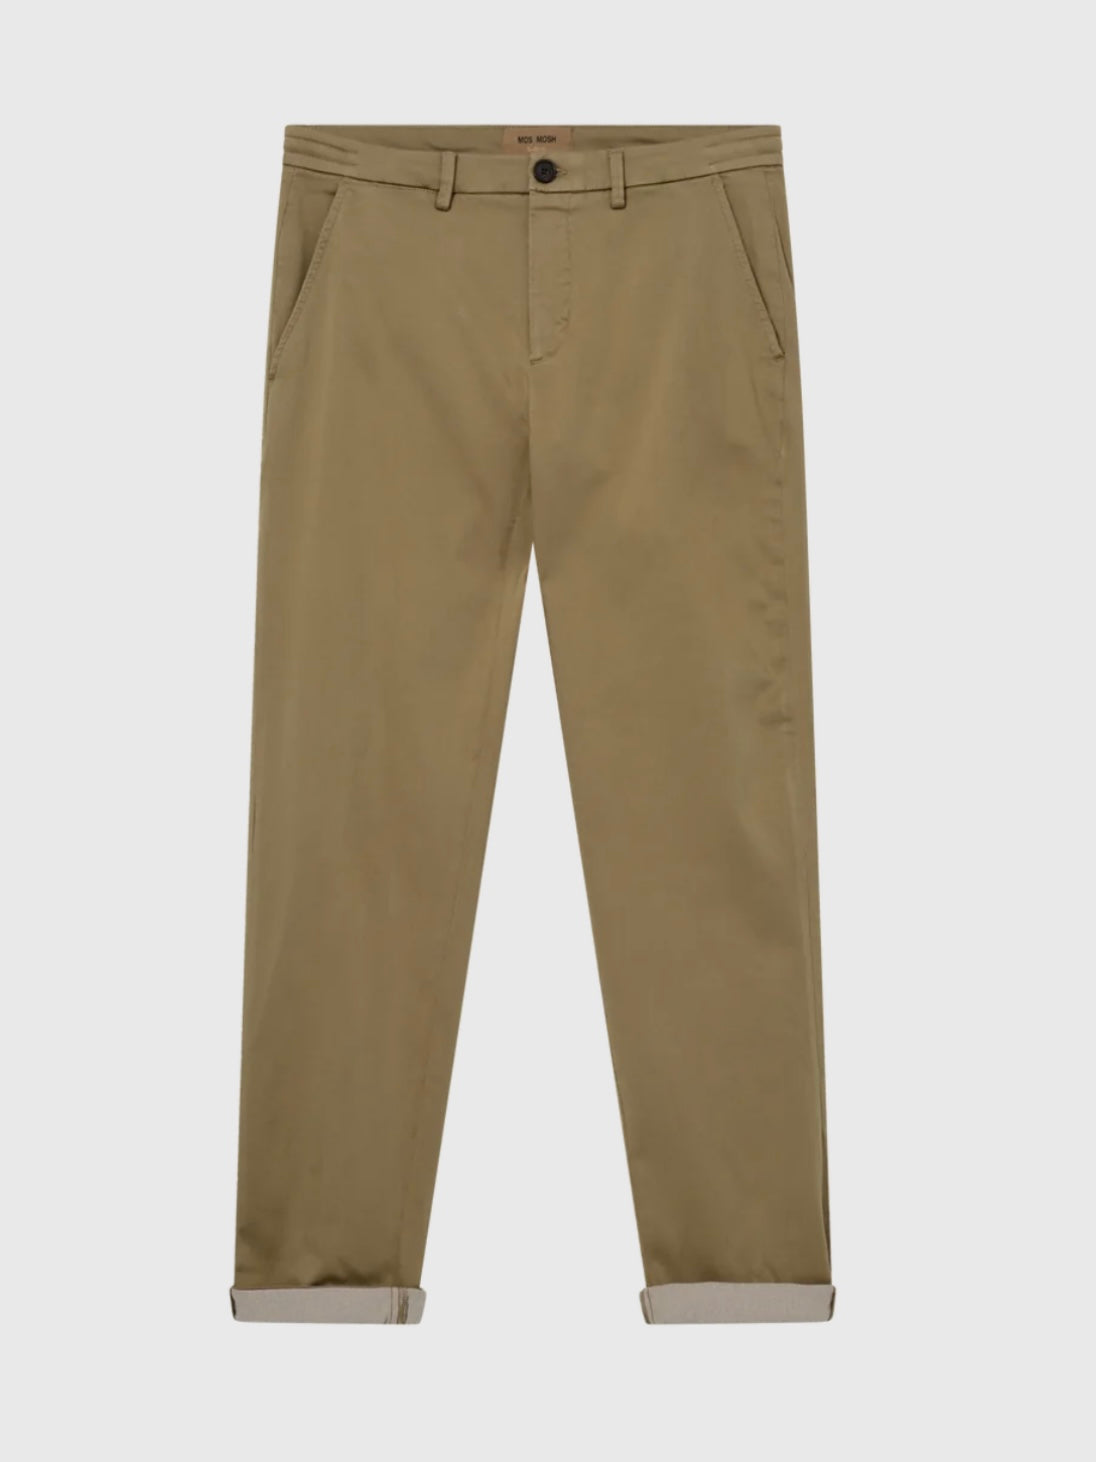 
                  
                    GALLERY MOS MOSH HUNT SOFT STRING PANT NEW SAND 34"
                  
                